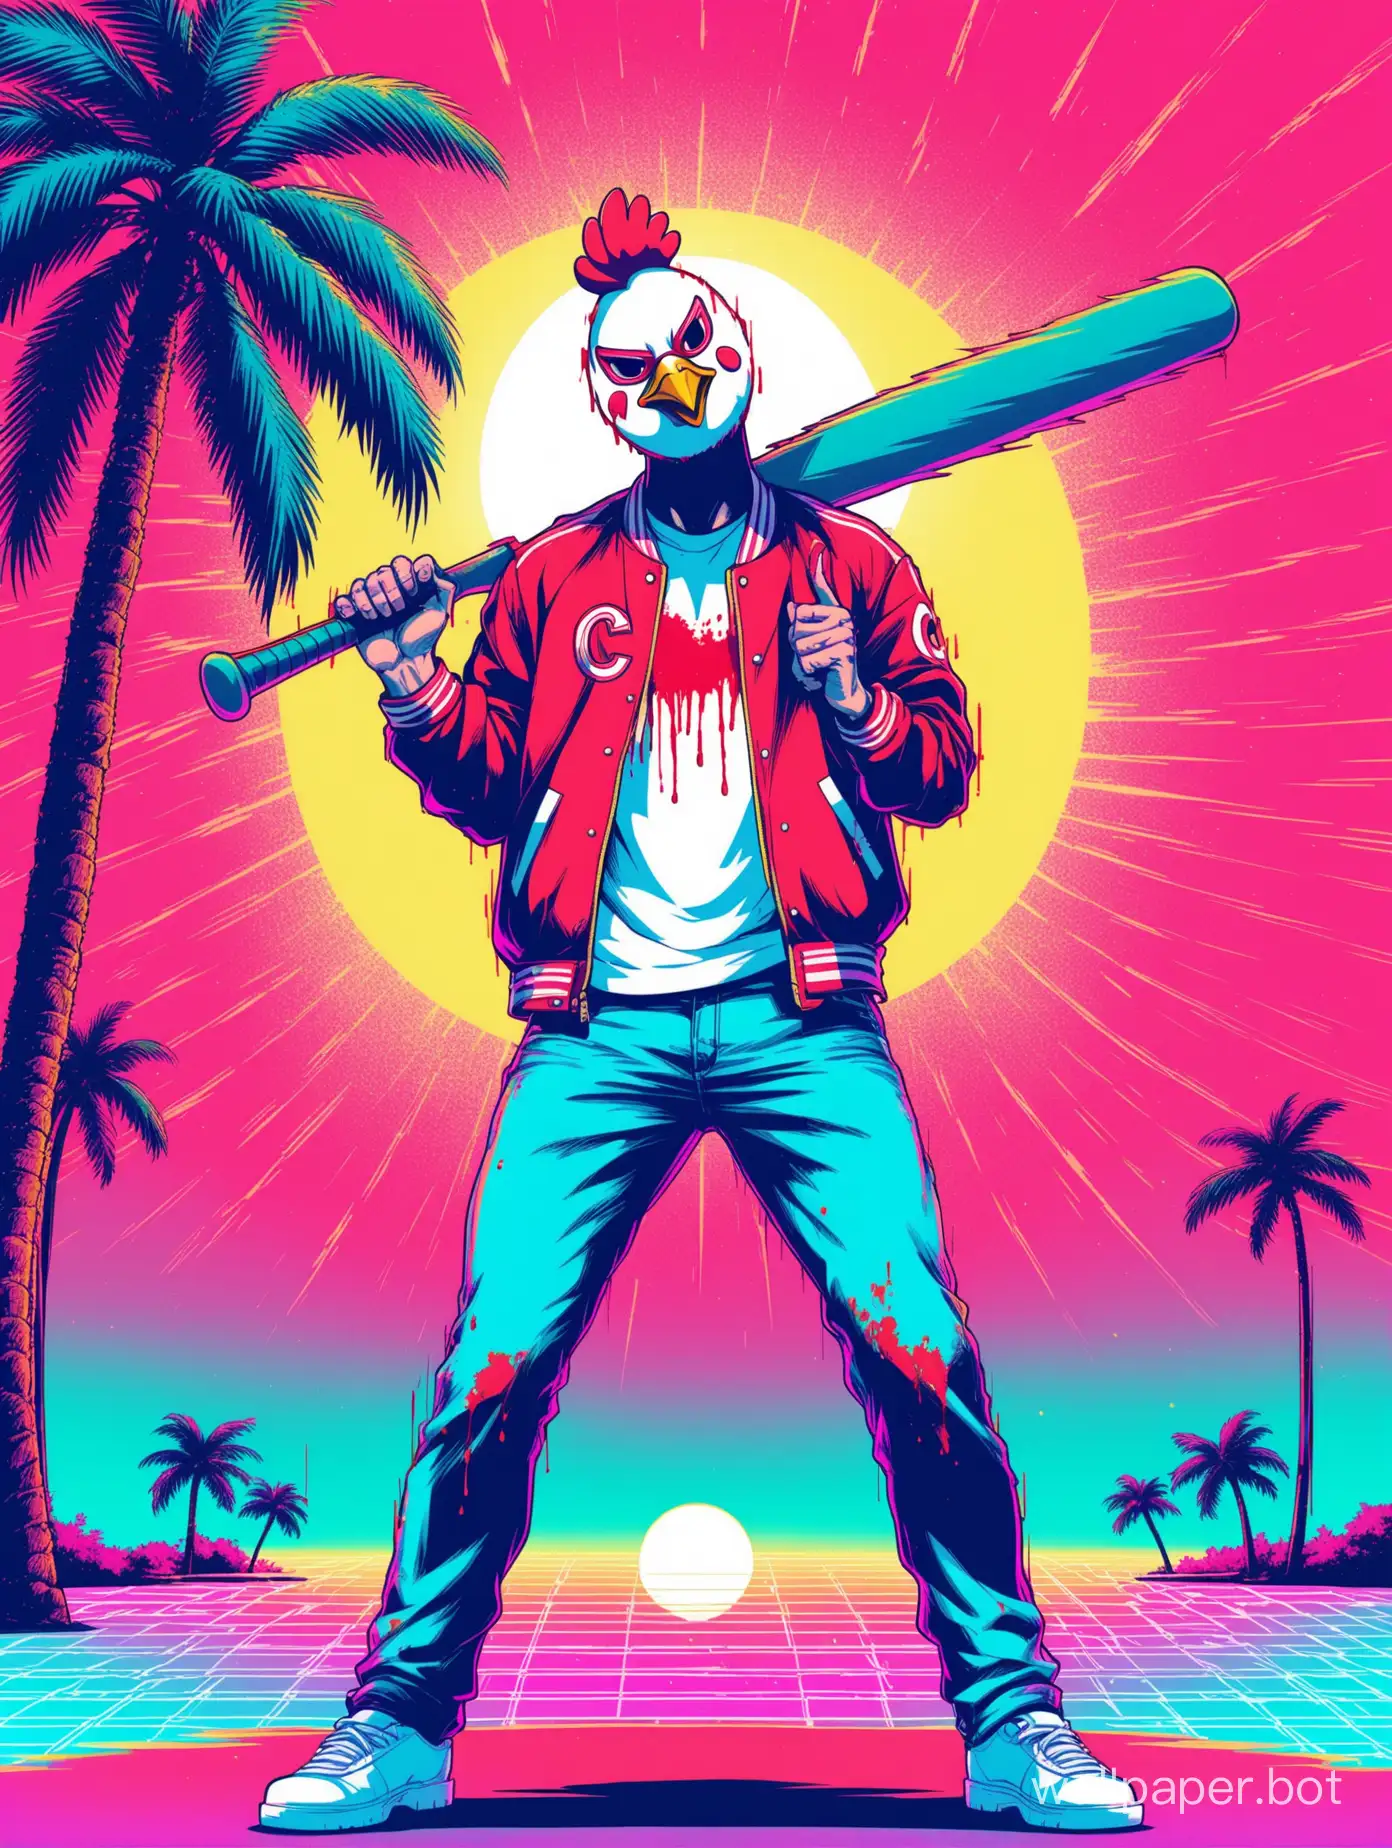 Bloodied-Baseball-Bat-White-Guy-in-Chicken-Mask-Amid-Vaporwave-Palm-Trees